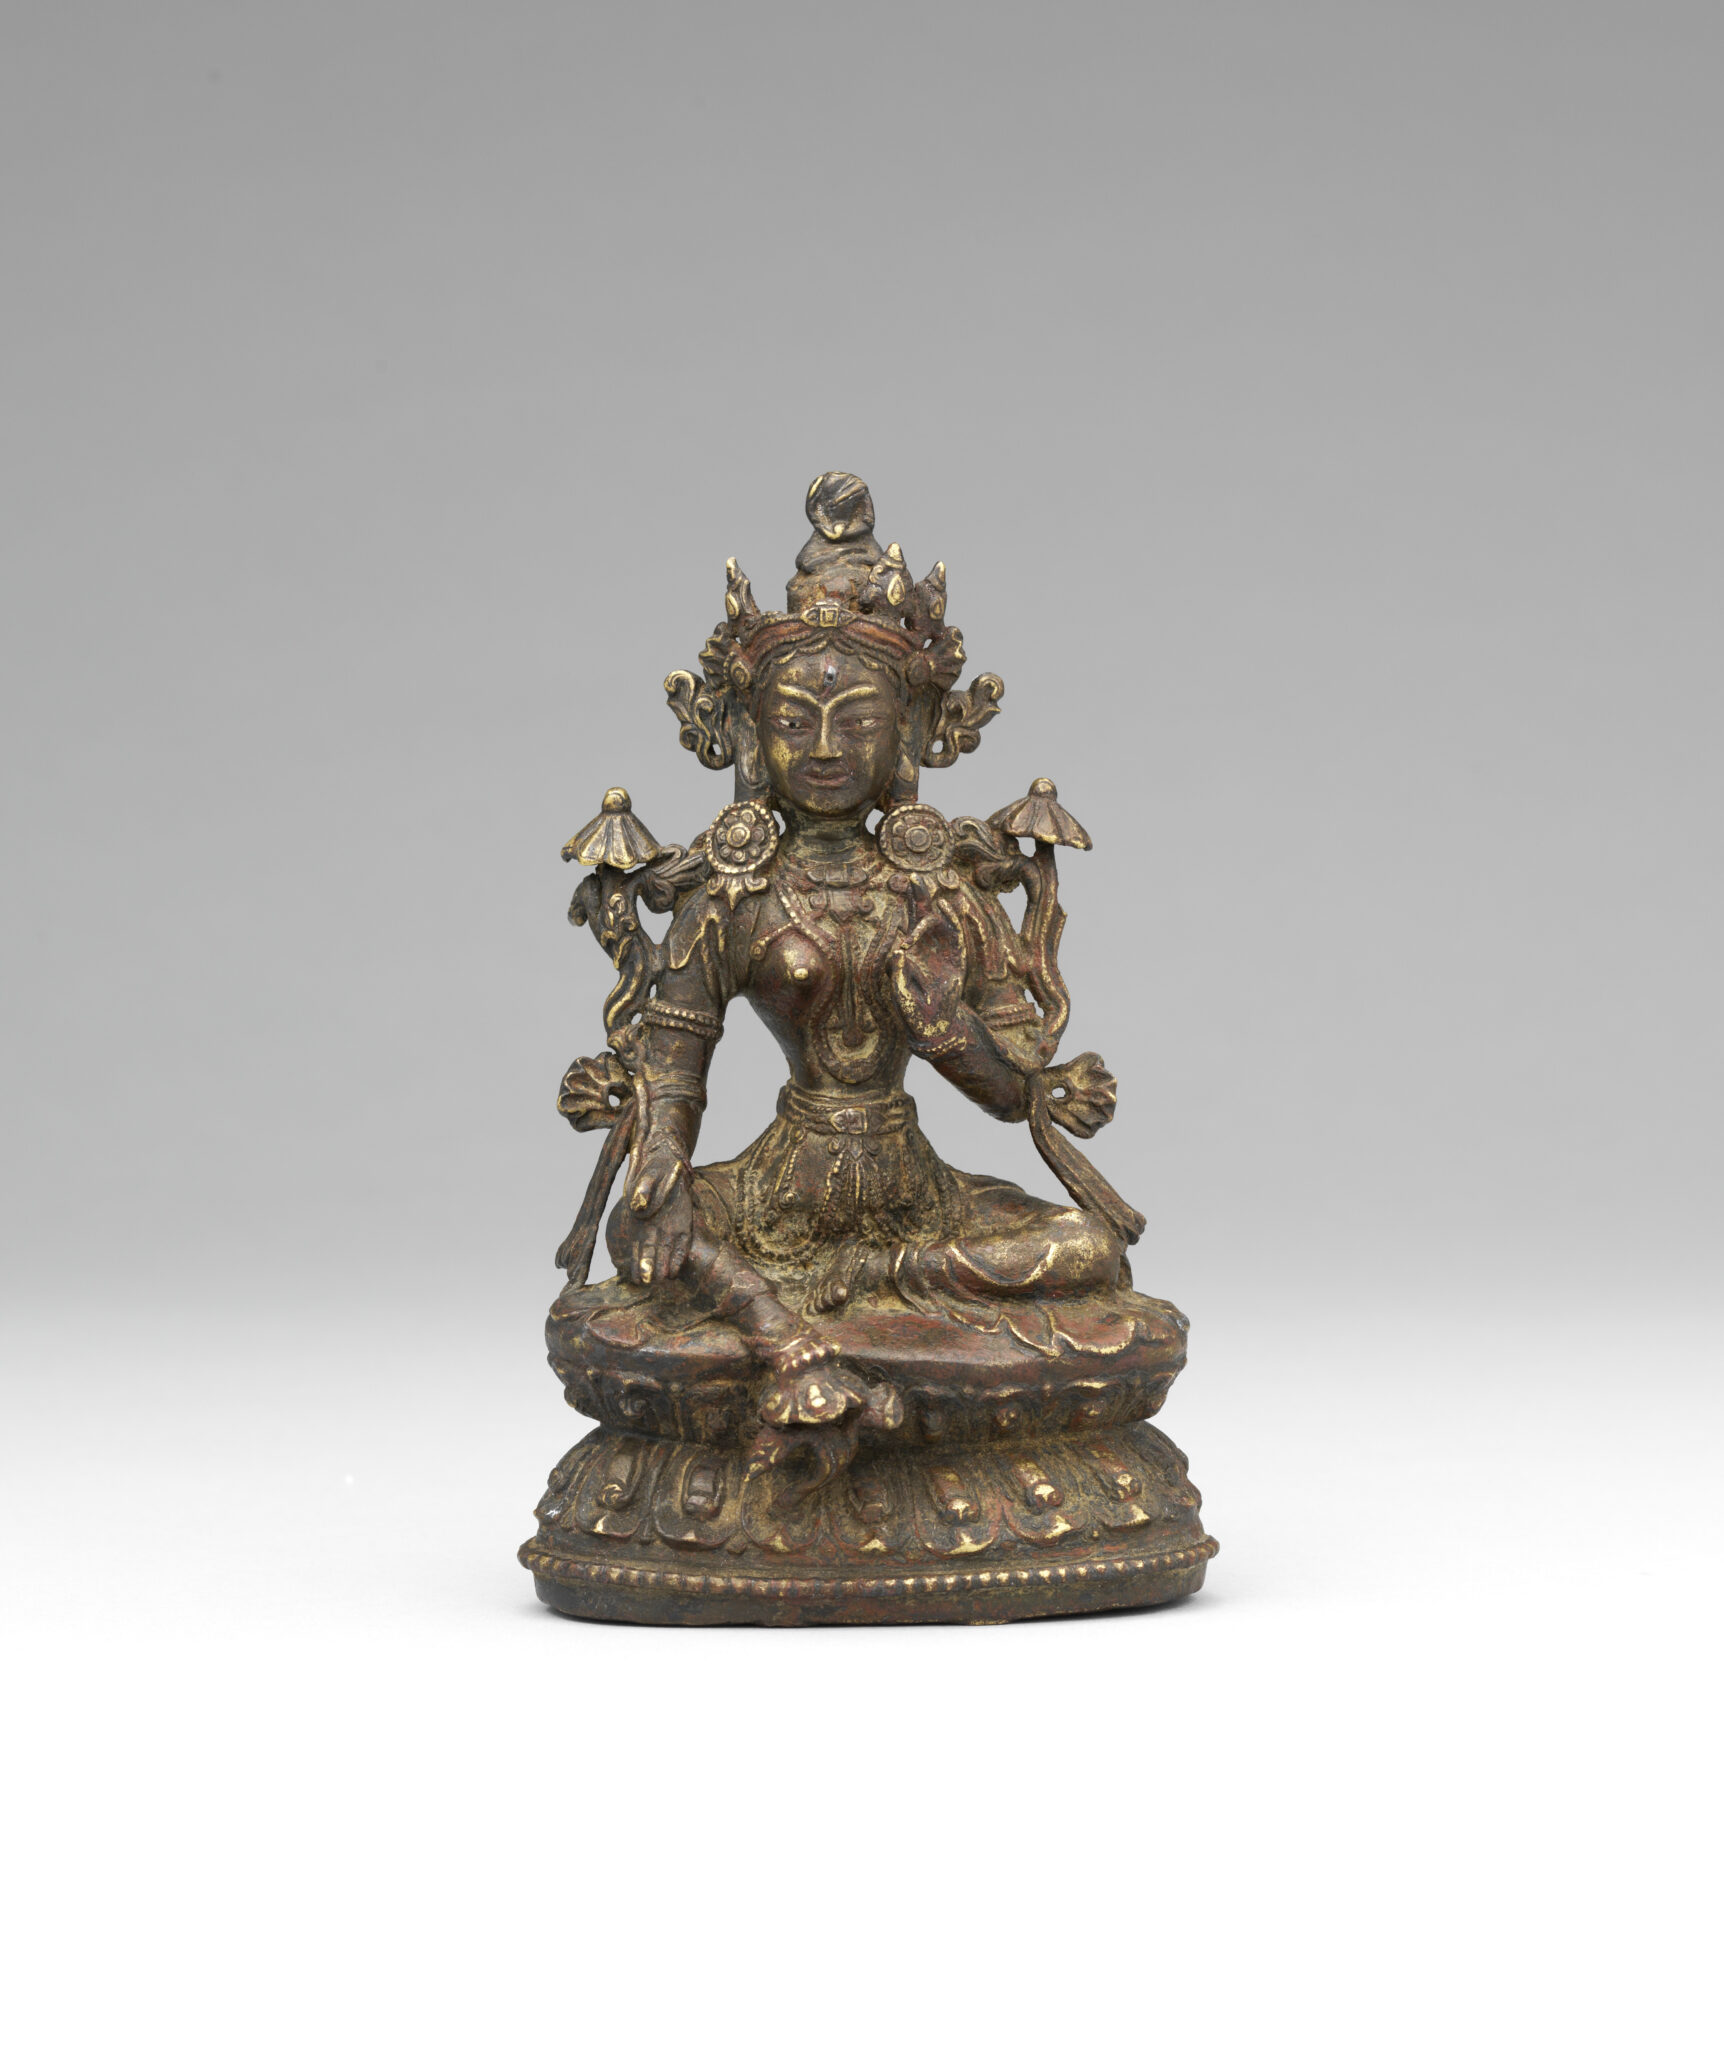 Patinated copper-colored statue depicting Bodhisattva holding hands in mudras, flanked by long-stemmed blossoms